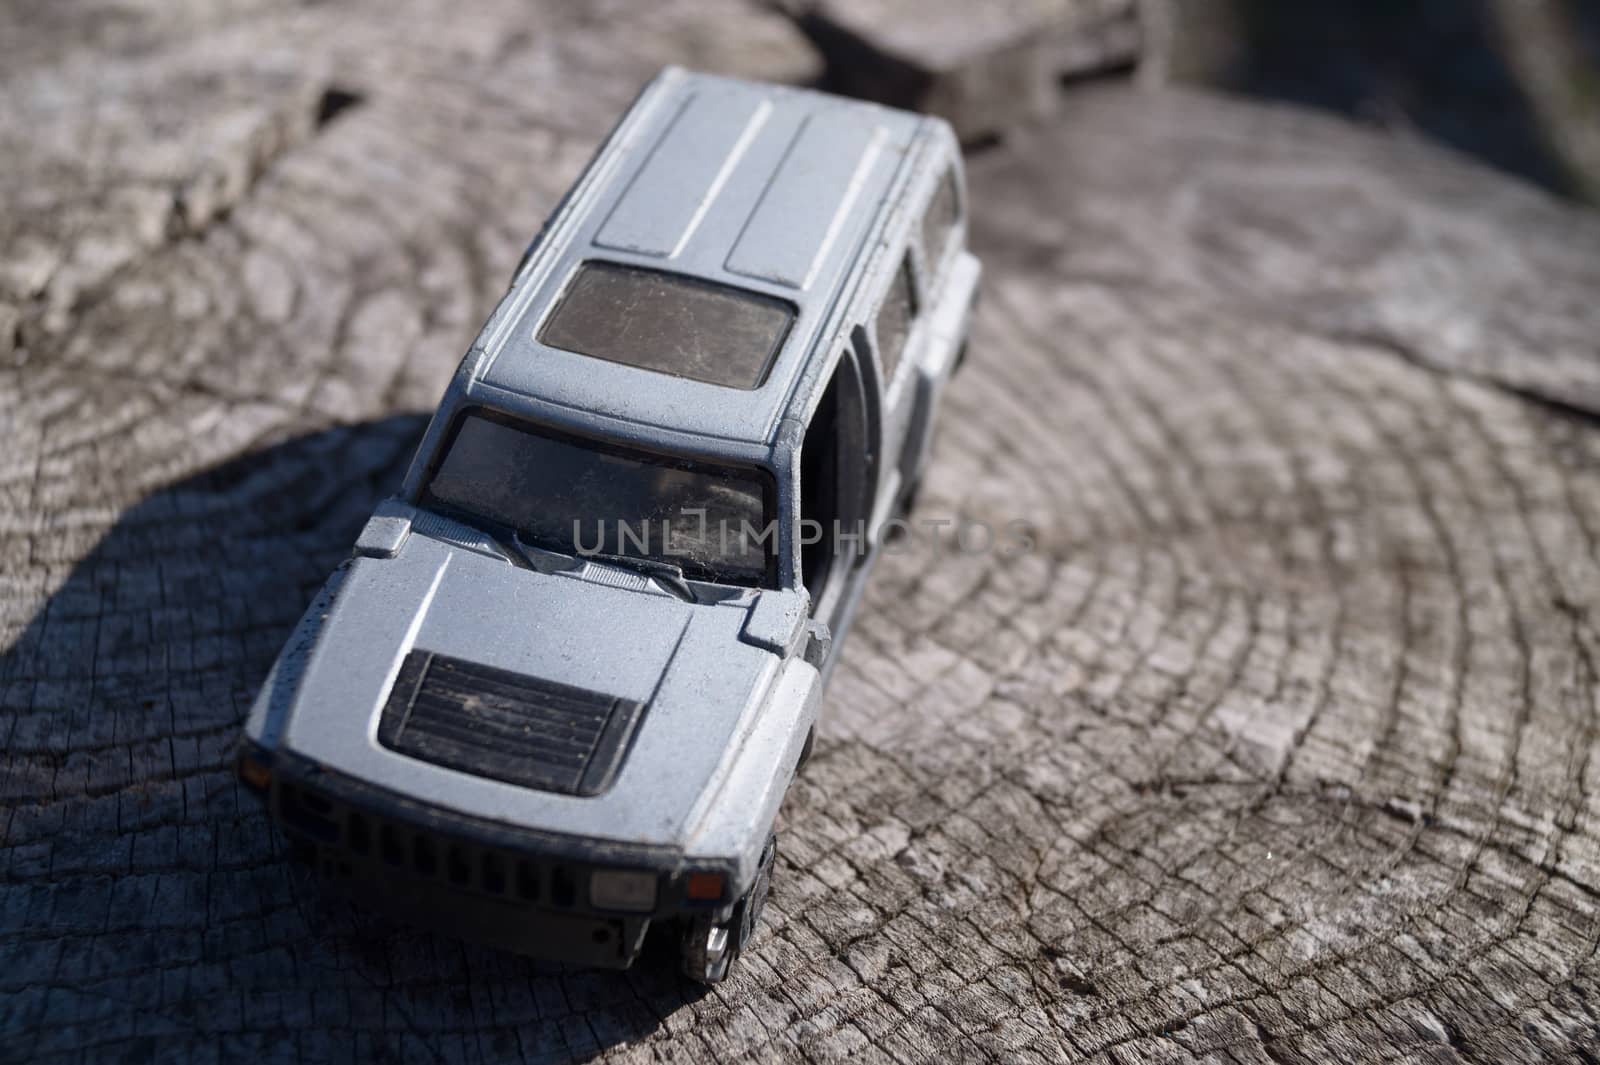 A silver toy car on wooden background. This is jeep offroad SUV made in metal by alexsdriver